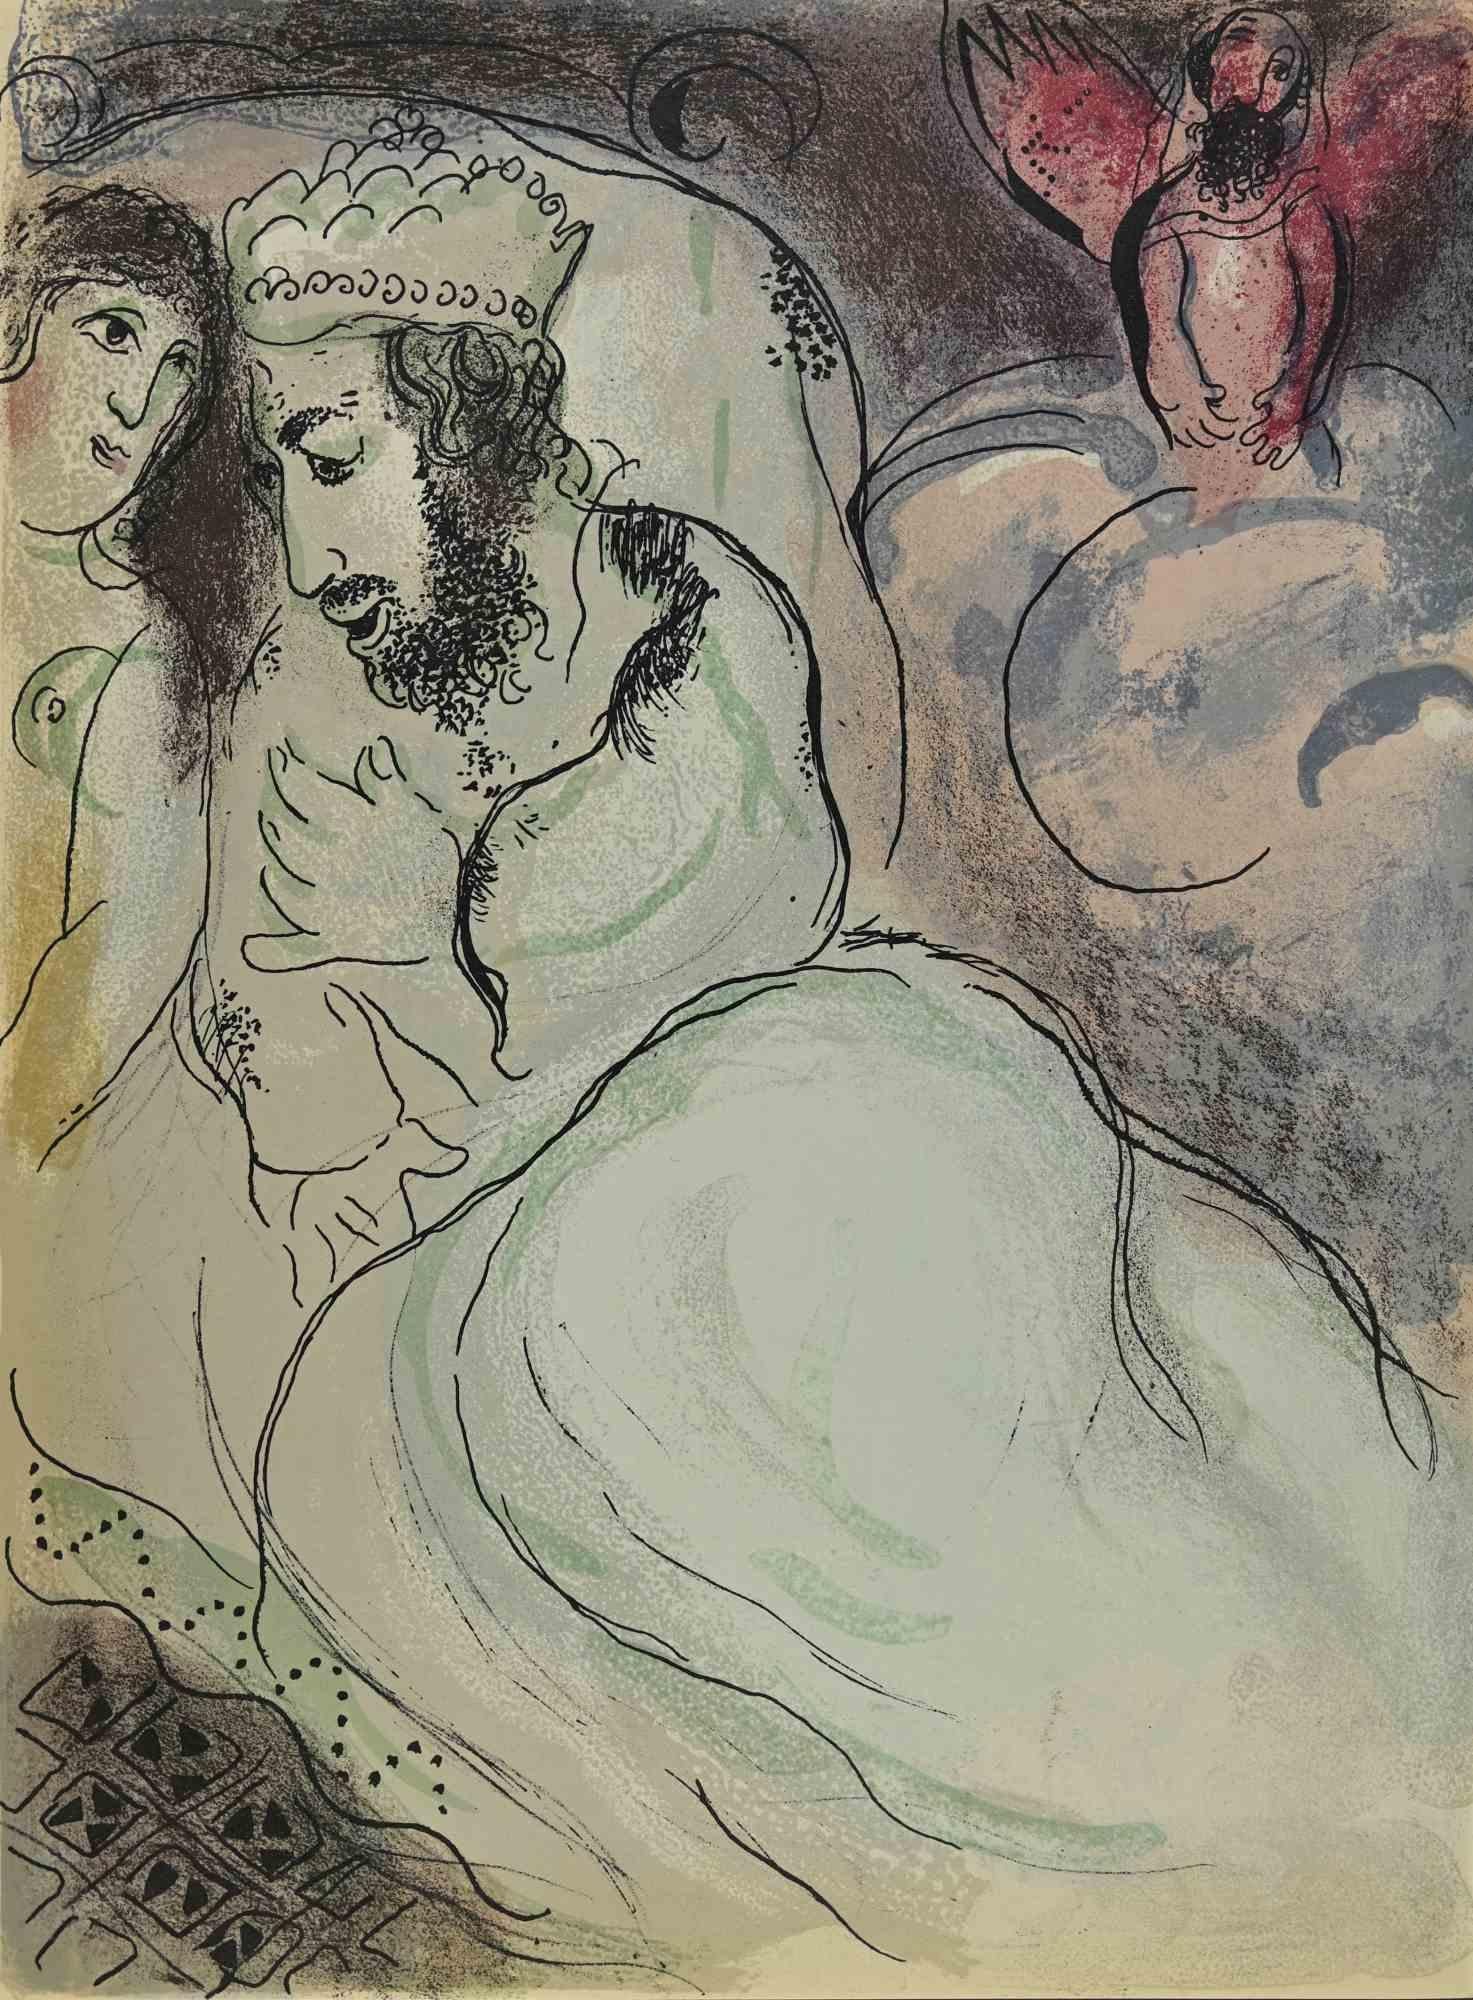 Abimelech  is an artwork from the Series "The Bible", by Marc Chagall in 1960.
Mixed colored lithograph on brown-toned paper, no signature.
Edition of 6500 unsigned lithographs. Printed by Mourlot and published by Tériade, Paris.
Ref. Mourlot, F.,